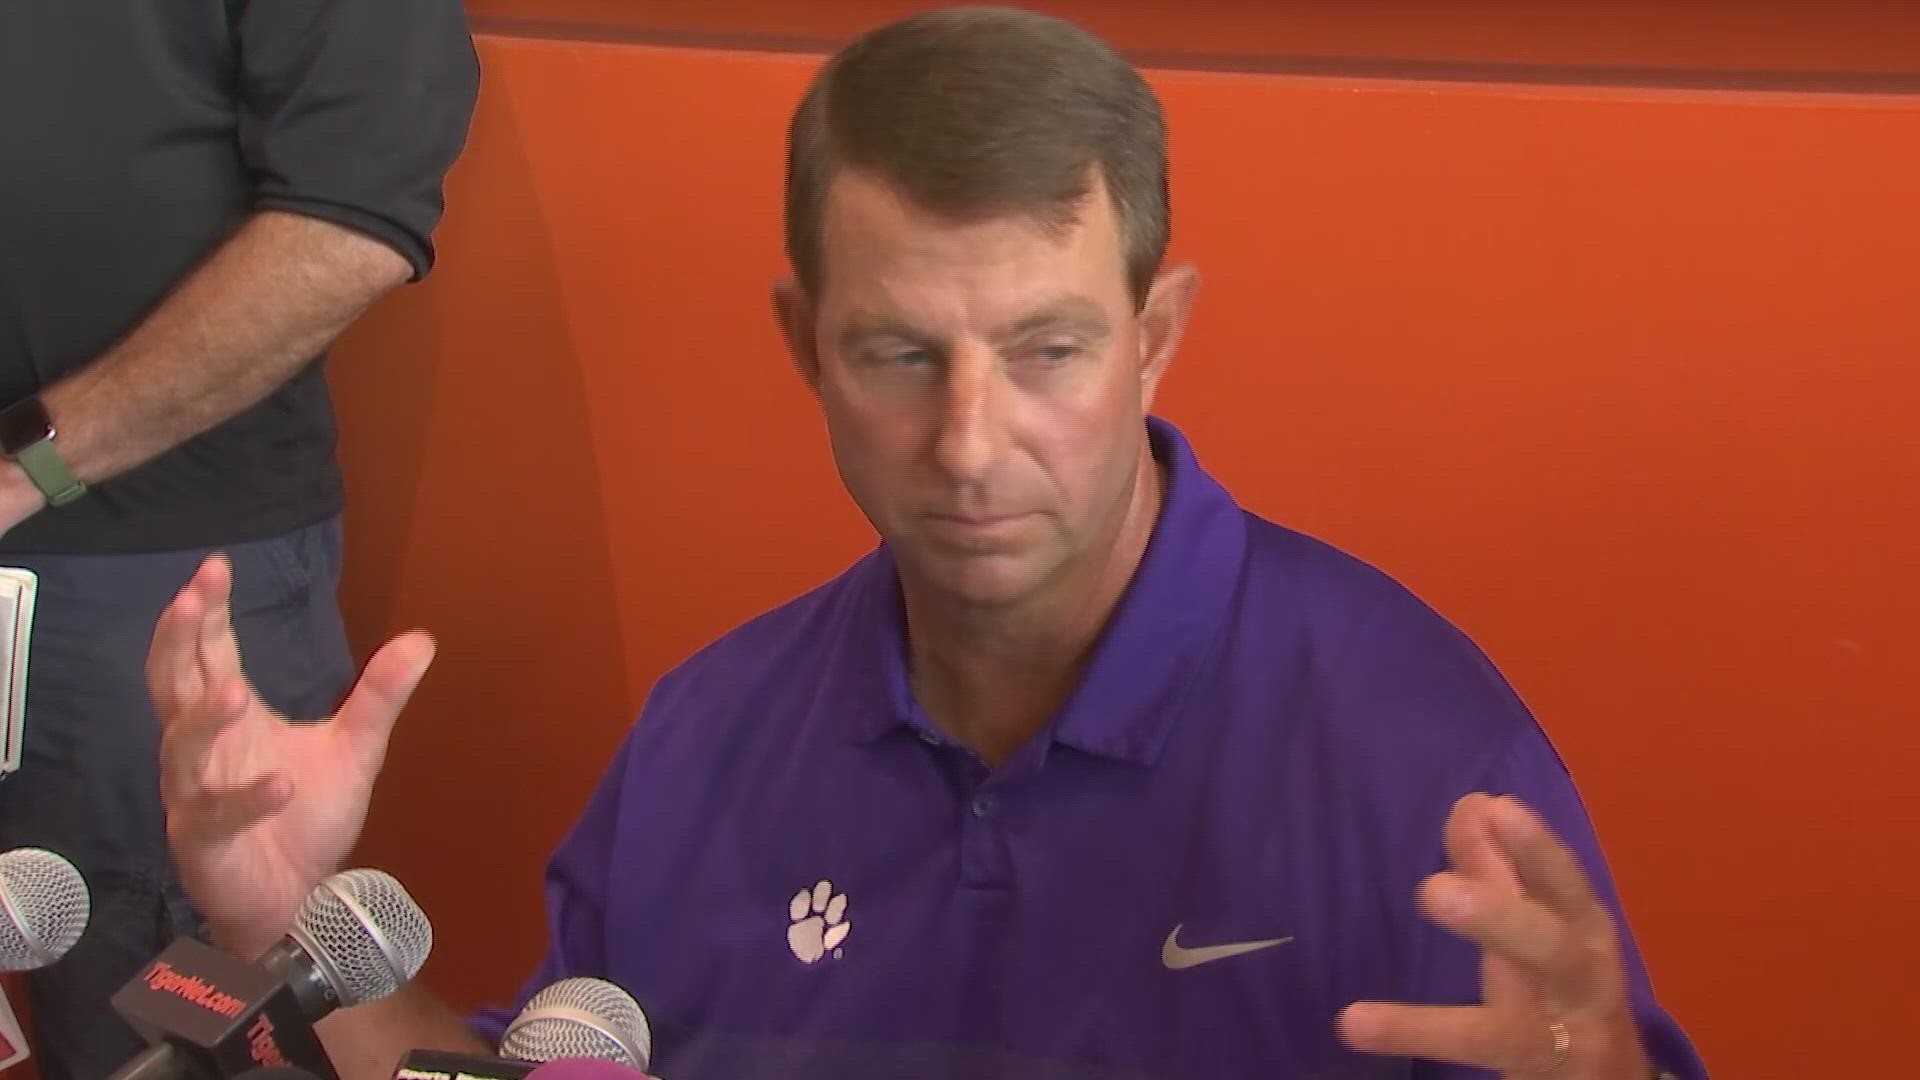 Clemson head football coach Dabo Swinney headlined Media Day in the Upstate and he was asked about the hot topic in college football - reallignment.